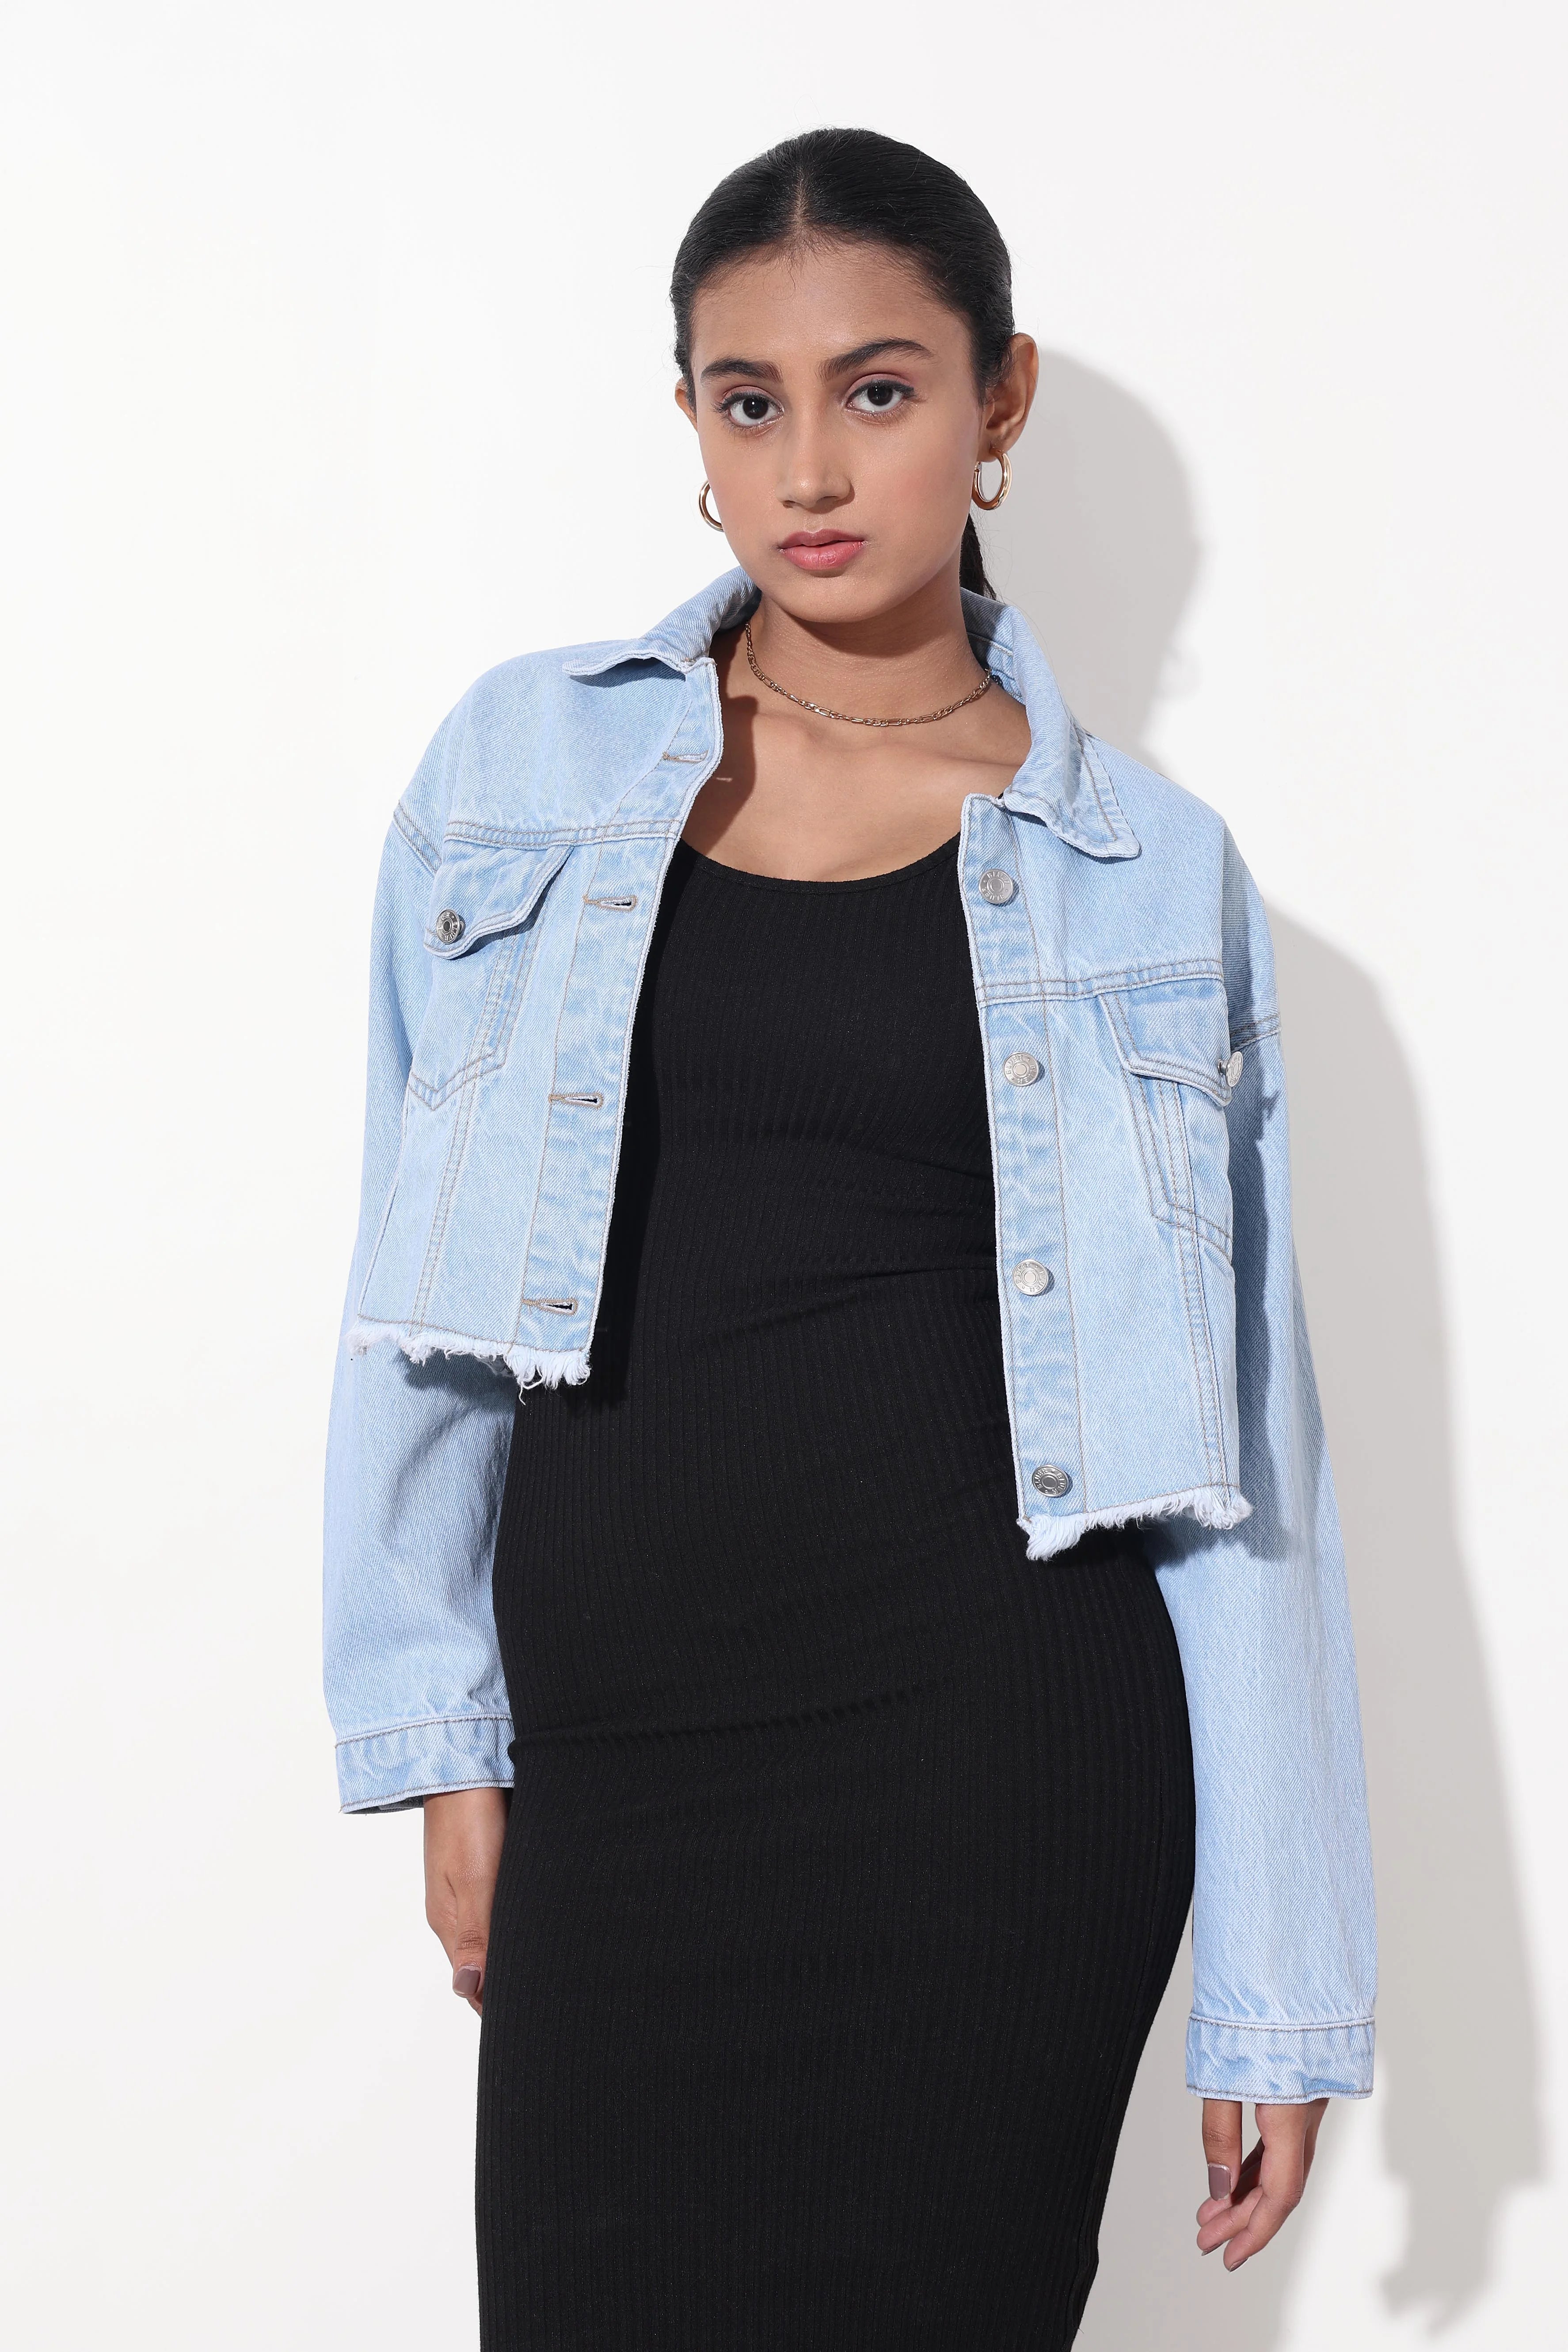 Buy Baberwals Ladies Mood Women's Casual Full Sleeves Denim Jacket, BLUE  Colour Online In India At Discounted Prices